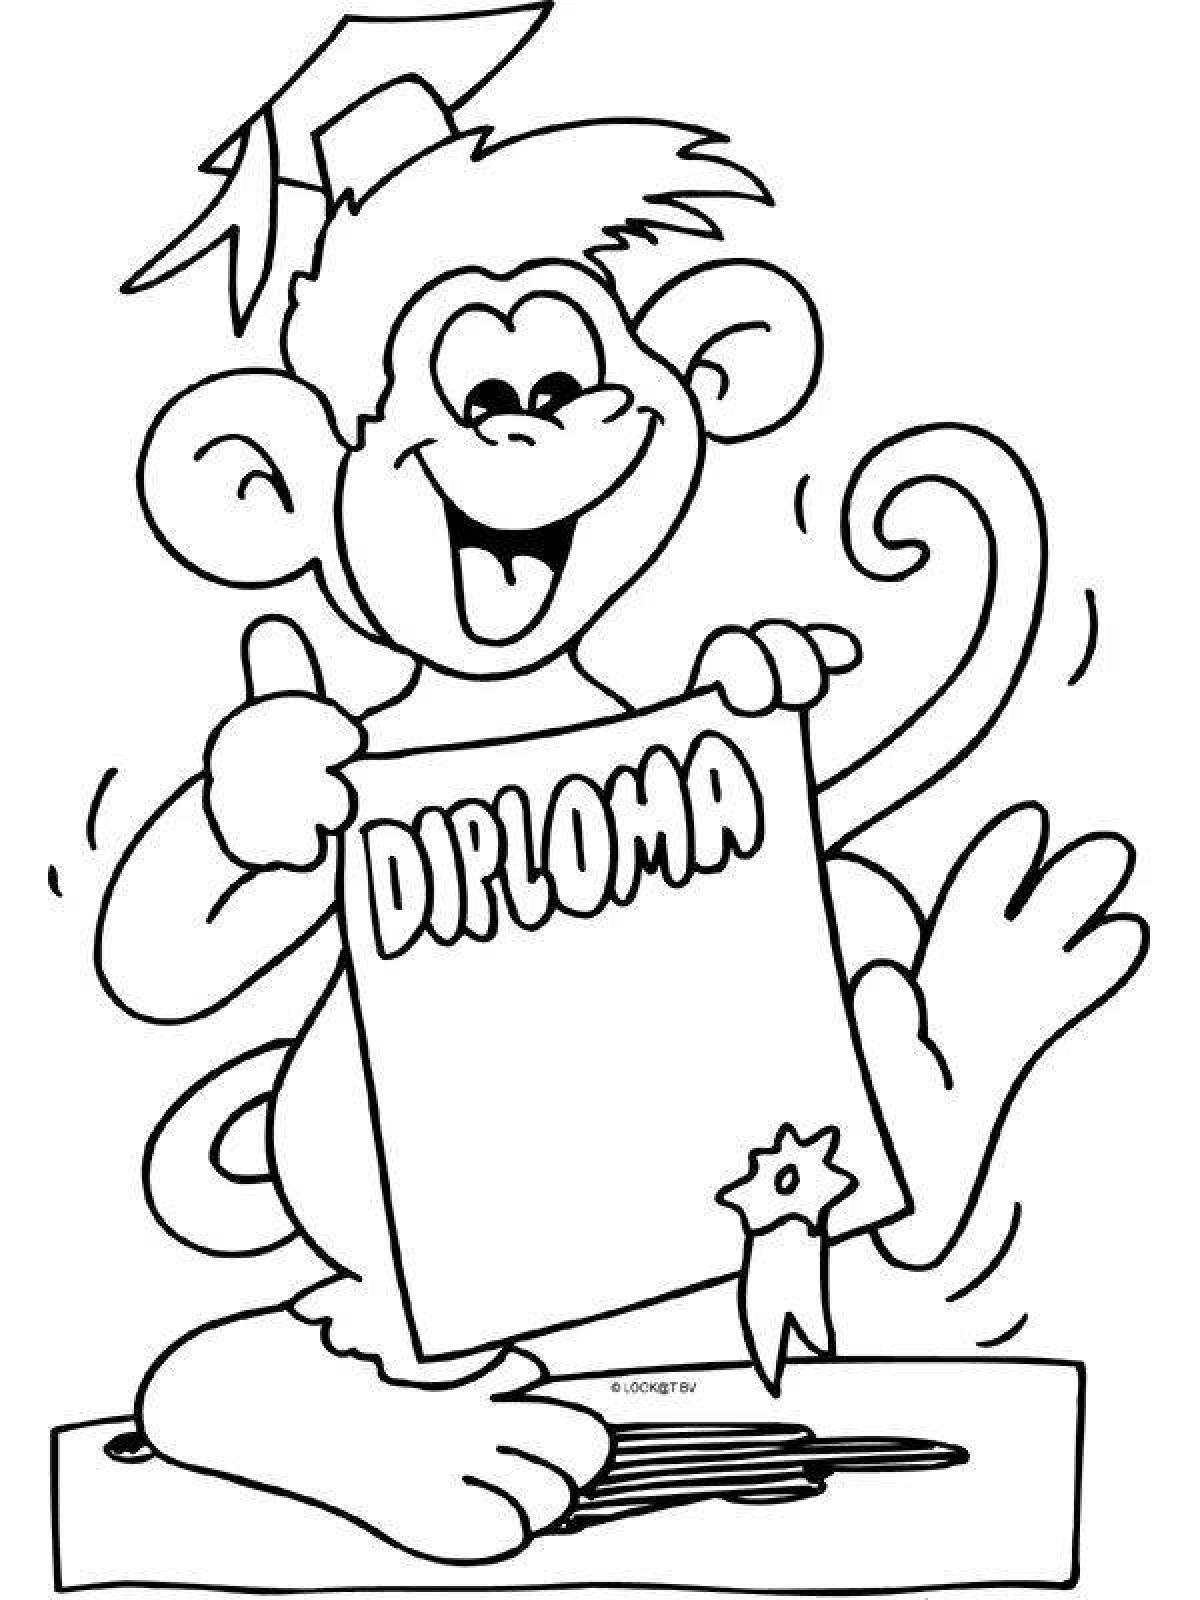 Charming charter coloring page